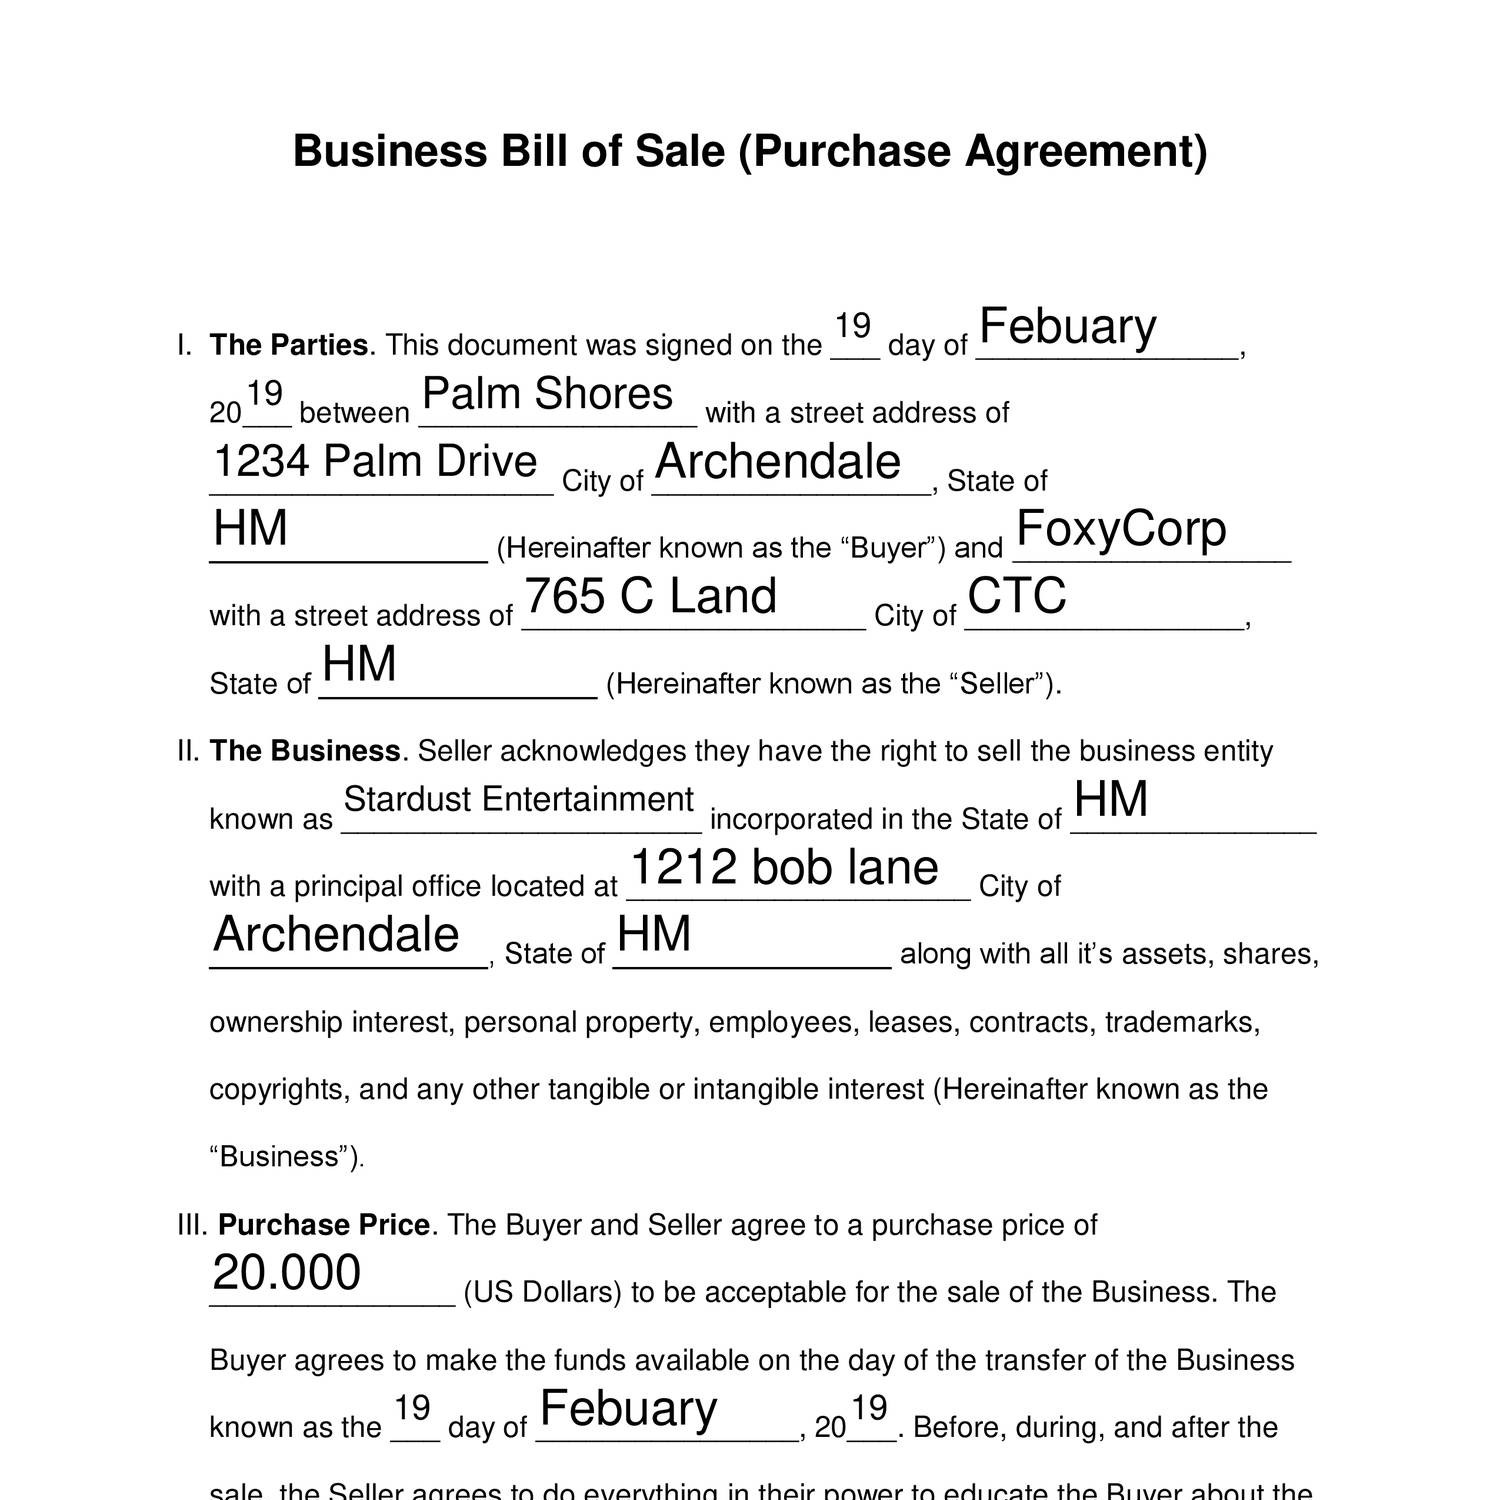 business-bill-of-sale-purchase-agreement-pdf-docdroid